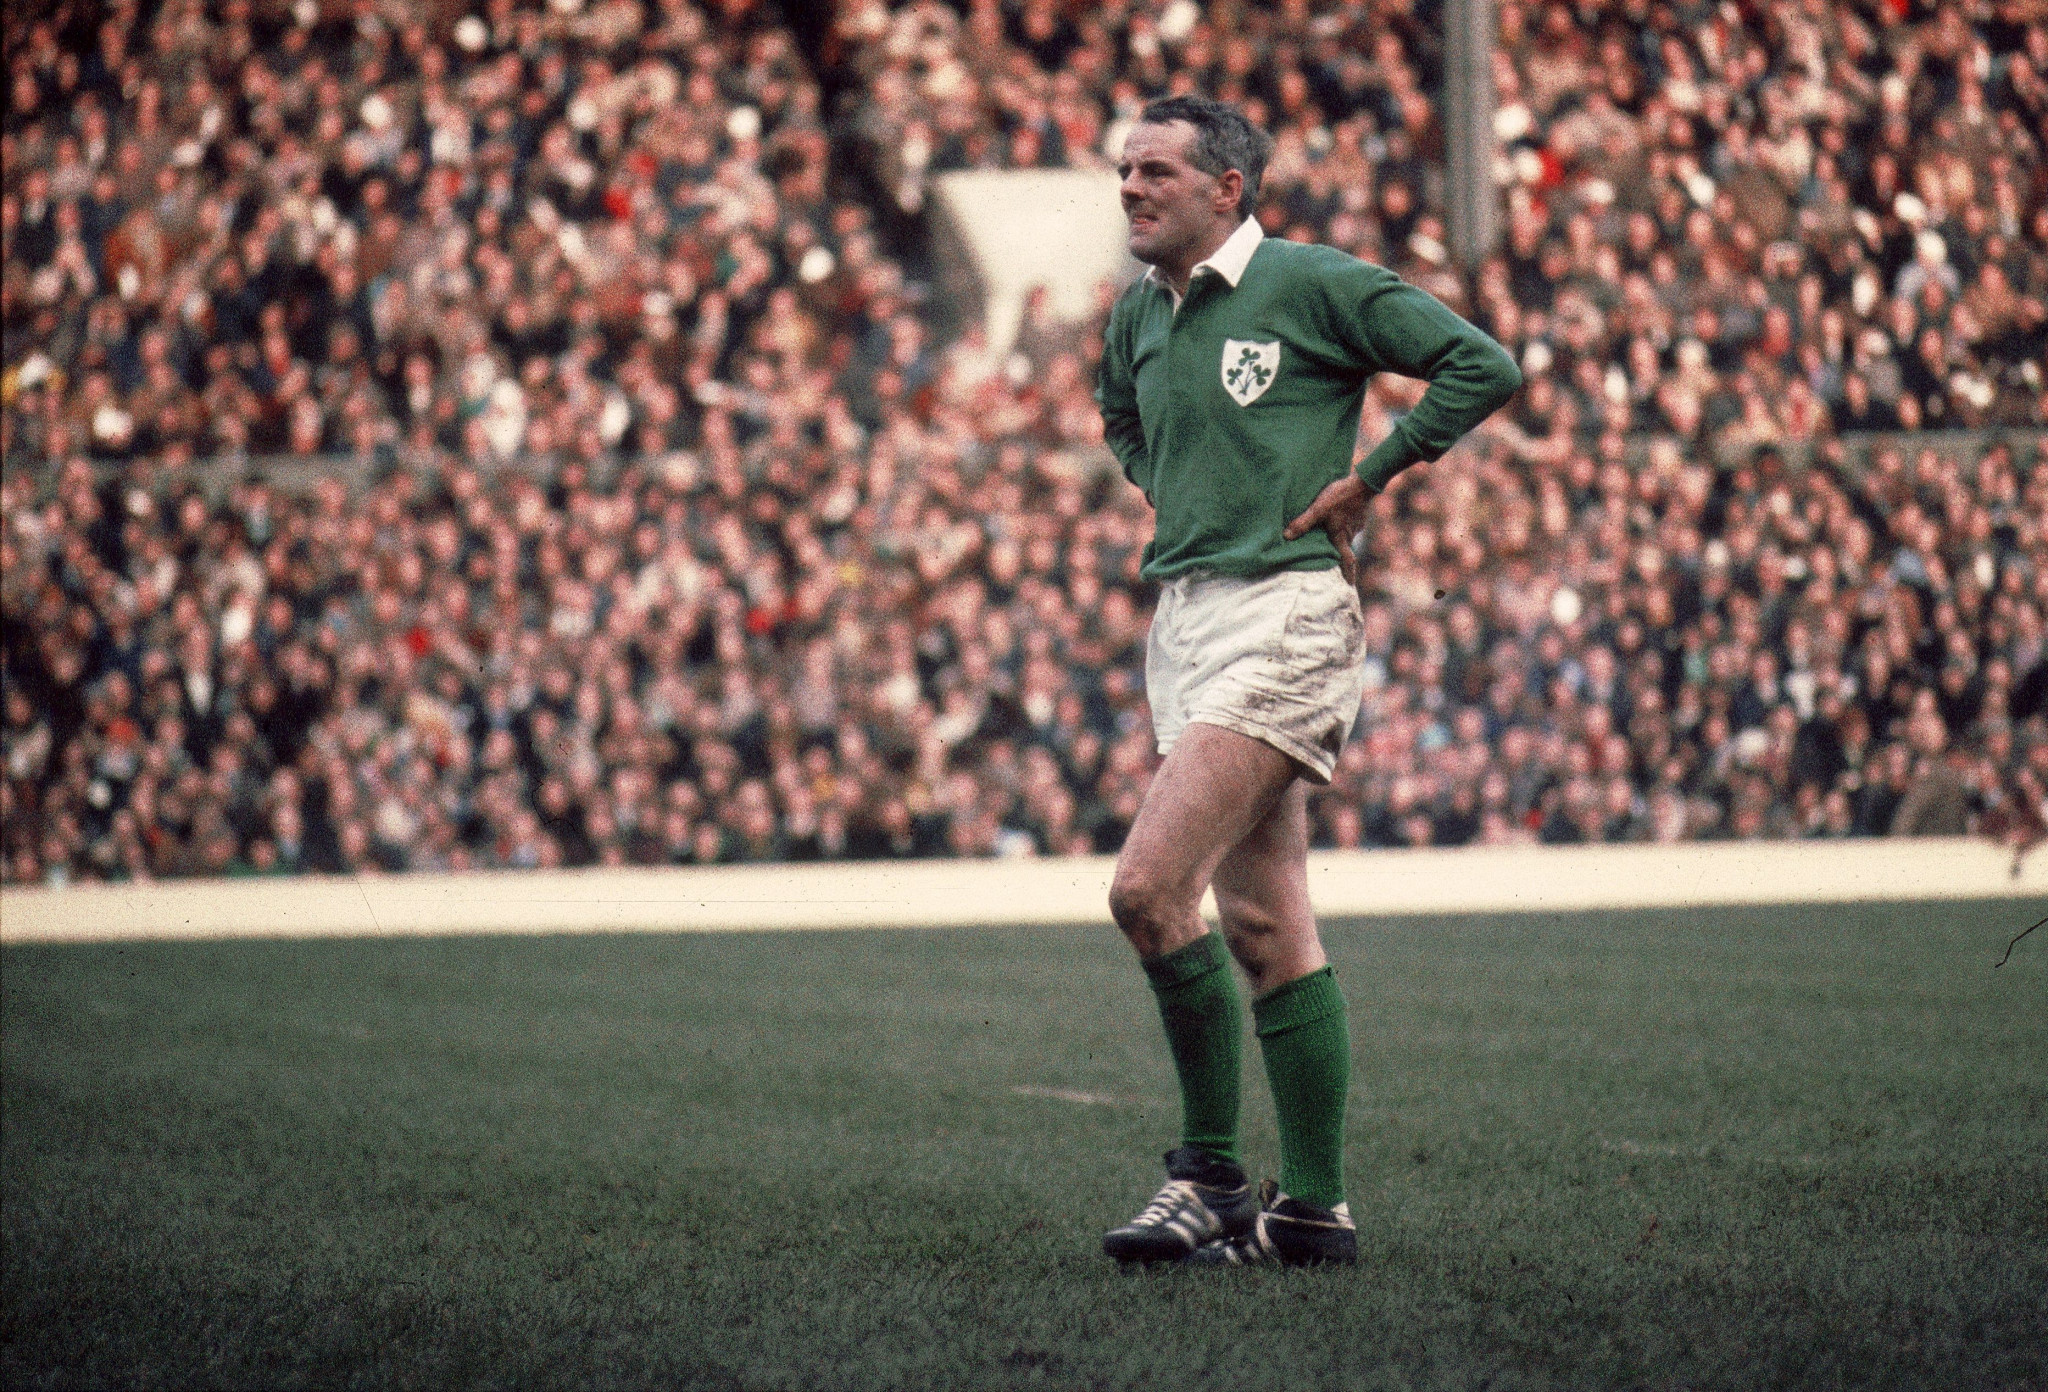 Tom Kiernan captained Ireland in 1972, and insisted opponents' concerns were misplaced ©Getty Images